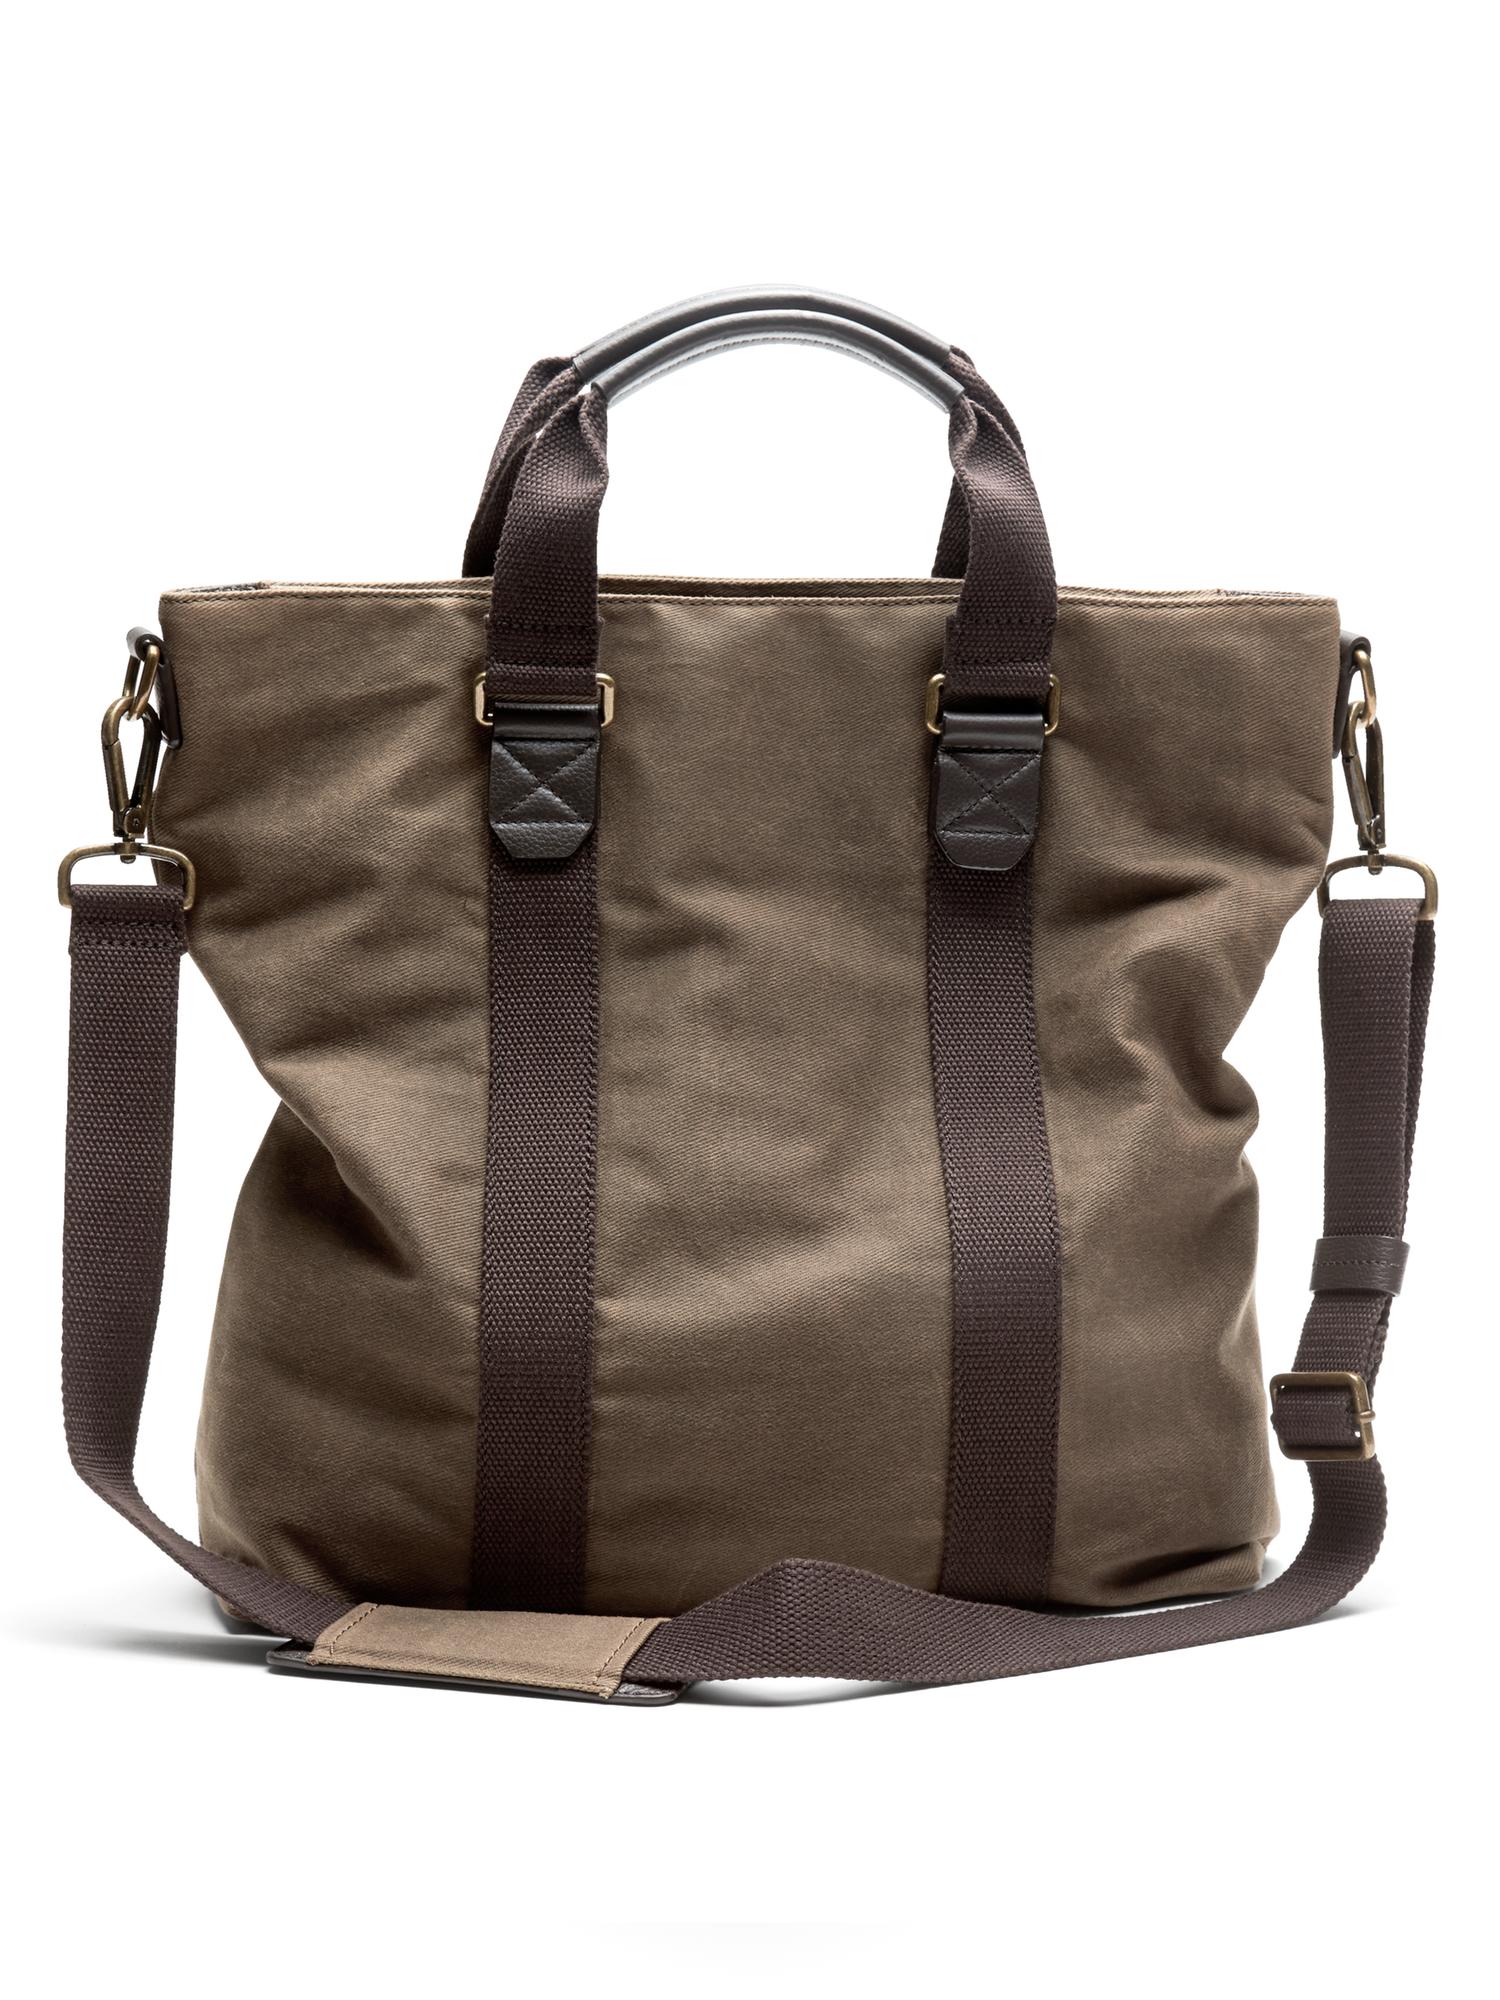 Rugged Canvas Tote